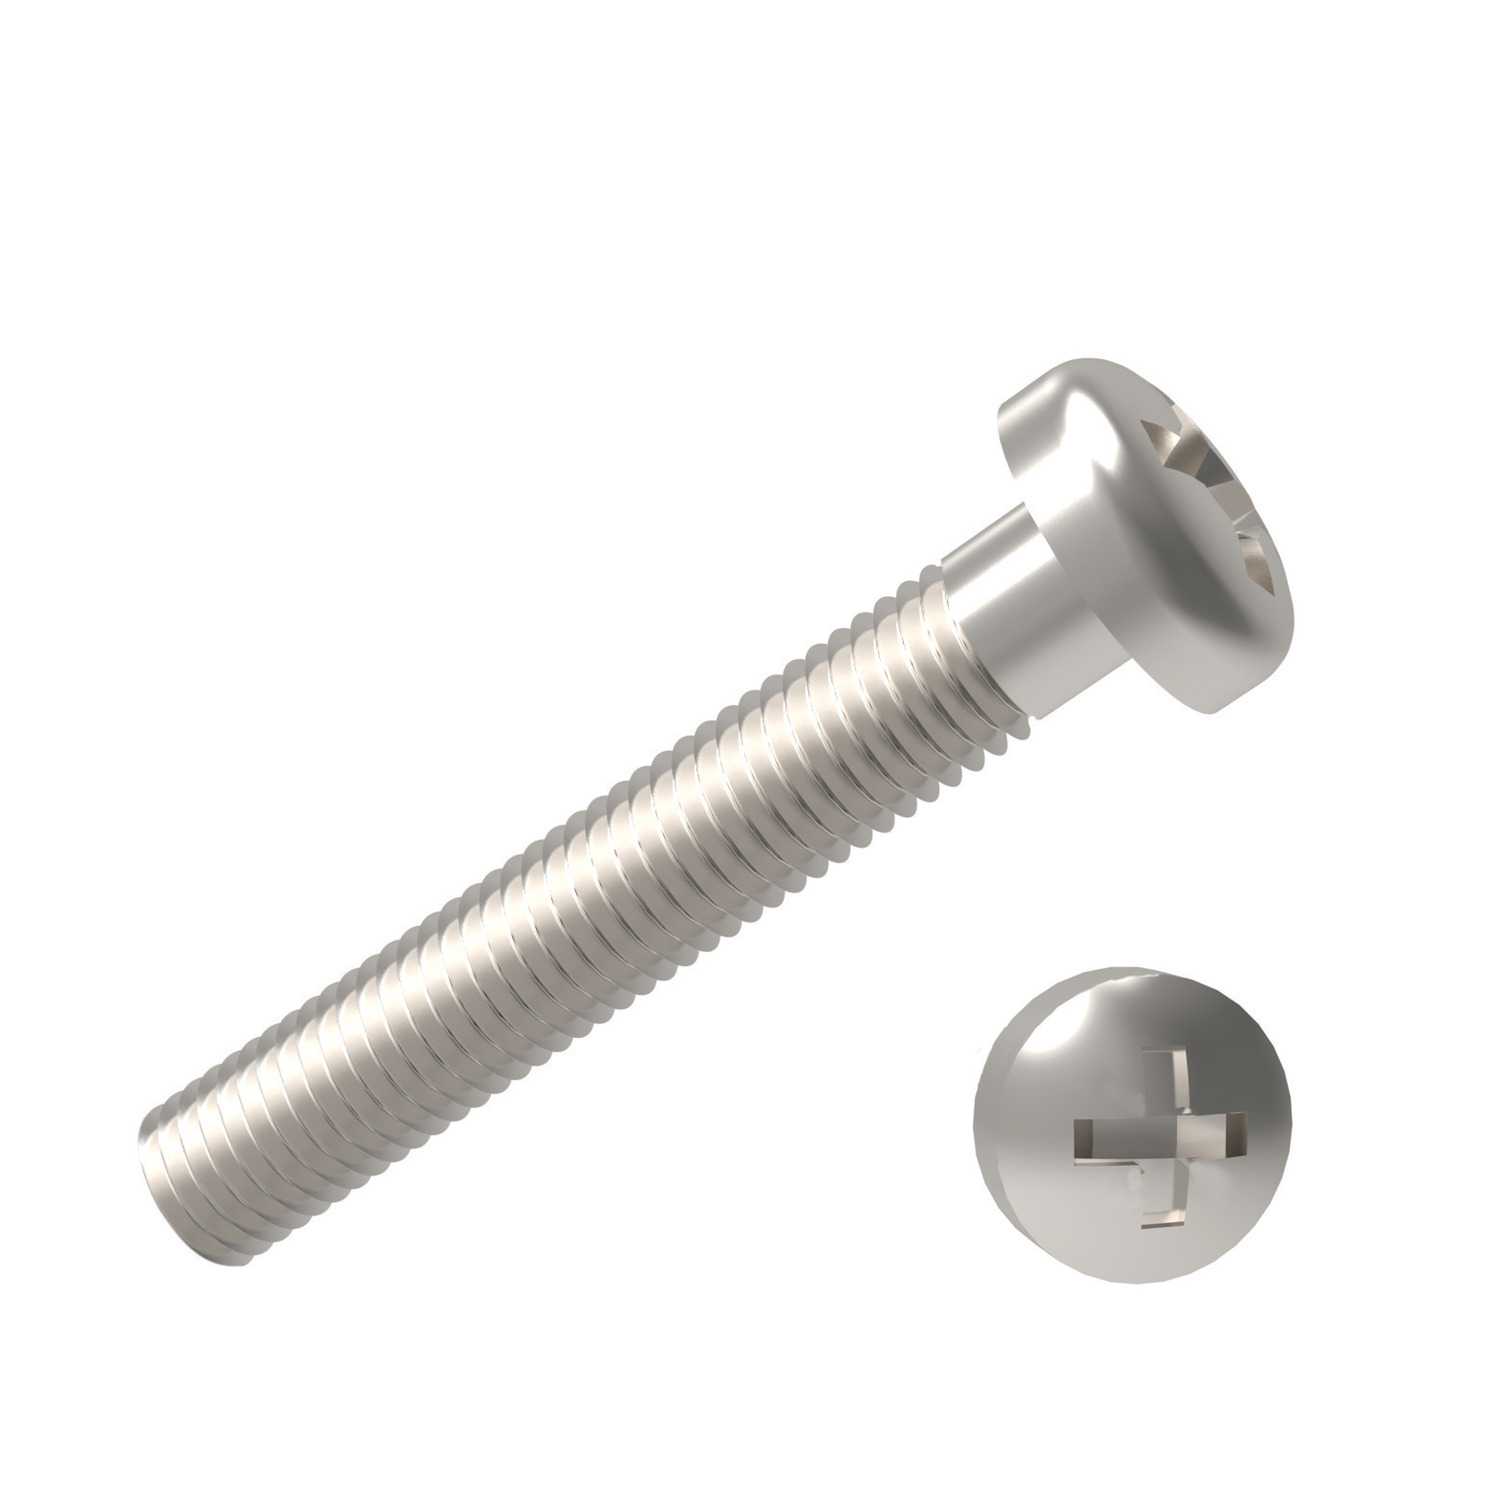 Product P0234.A2, Phillips Pan Head Screws Phillips - A2 stainless / 